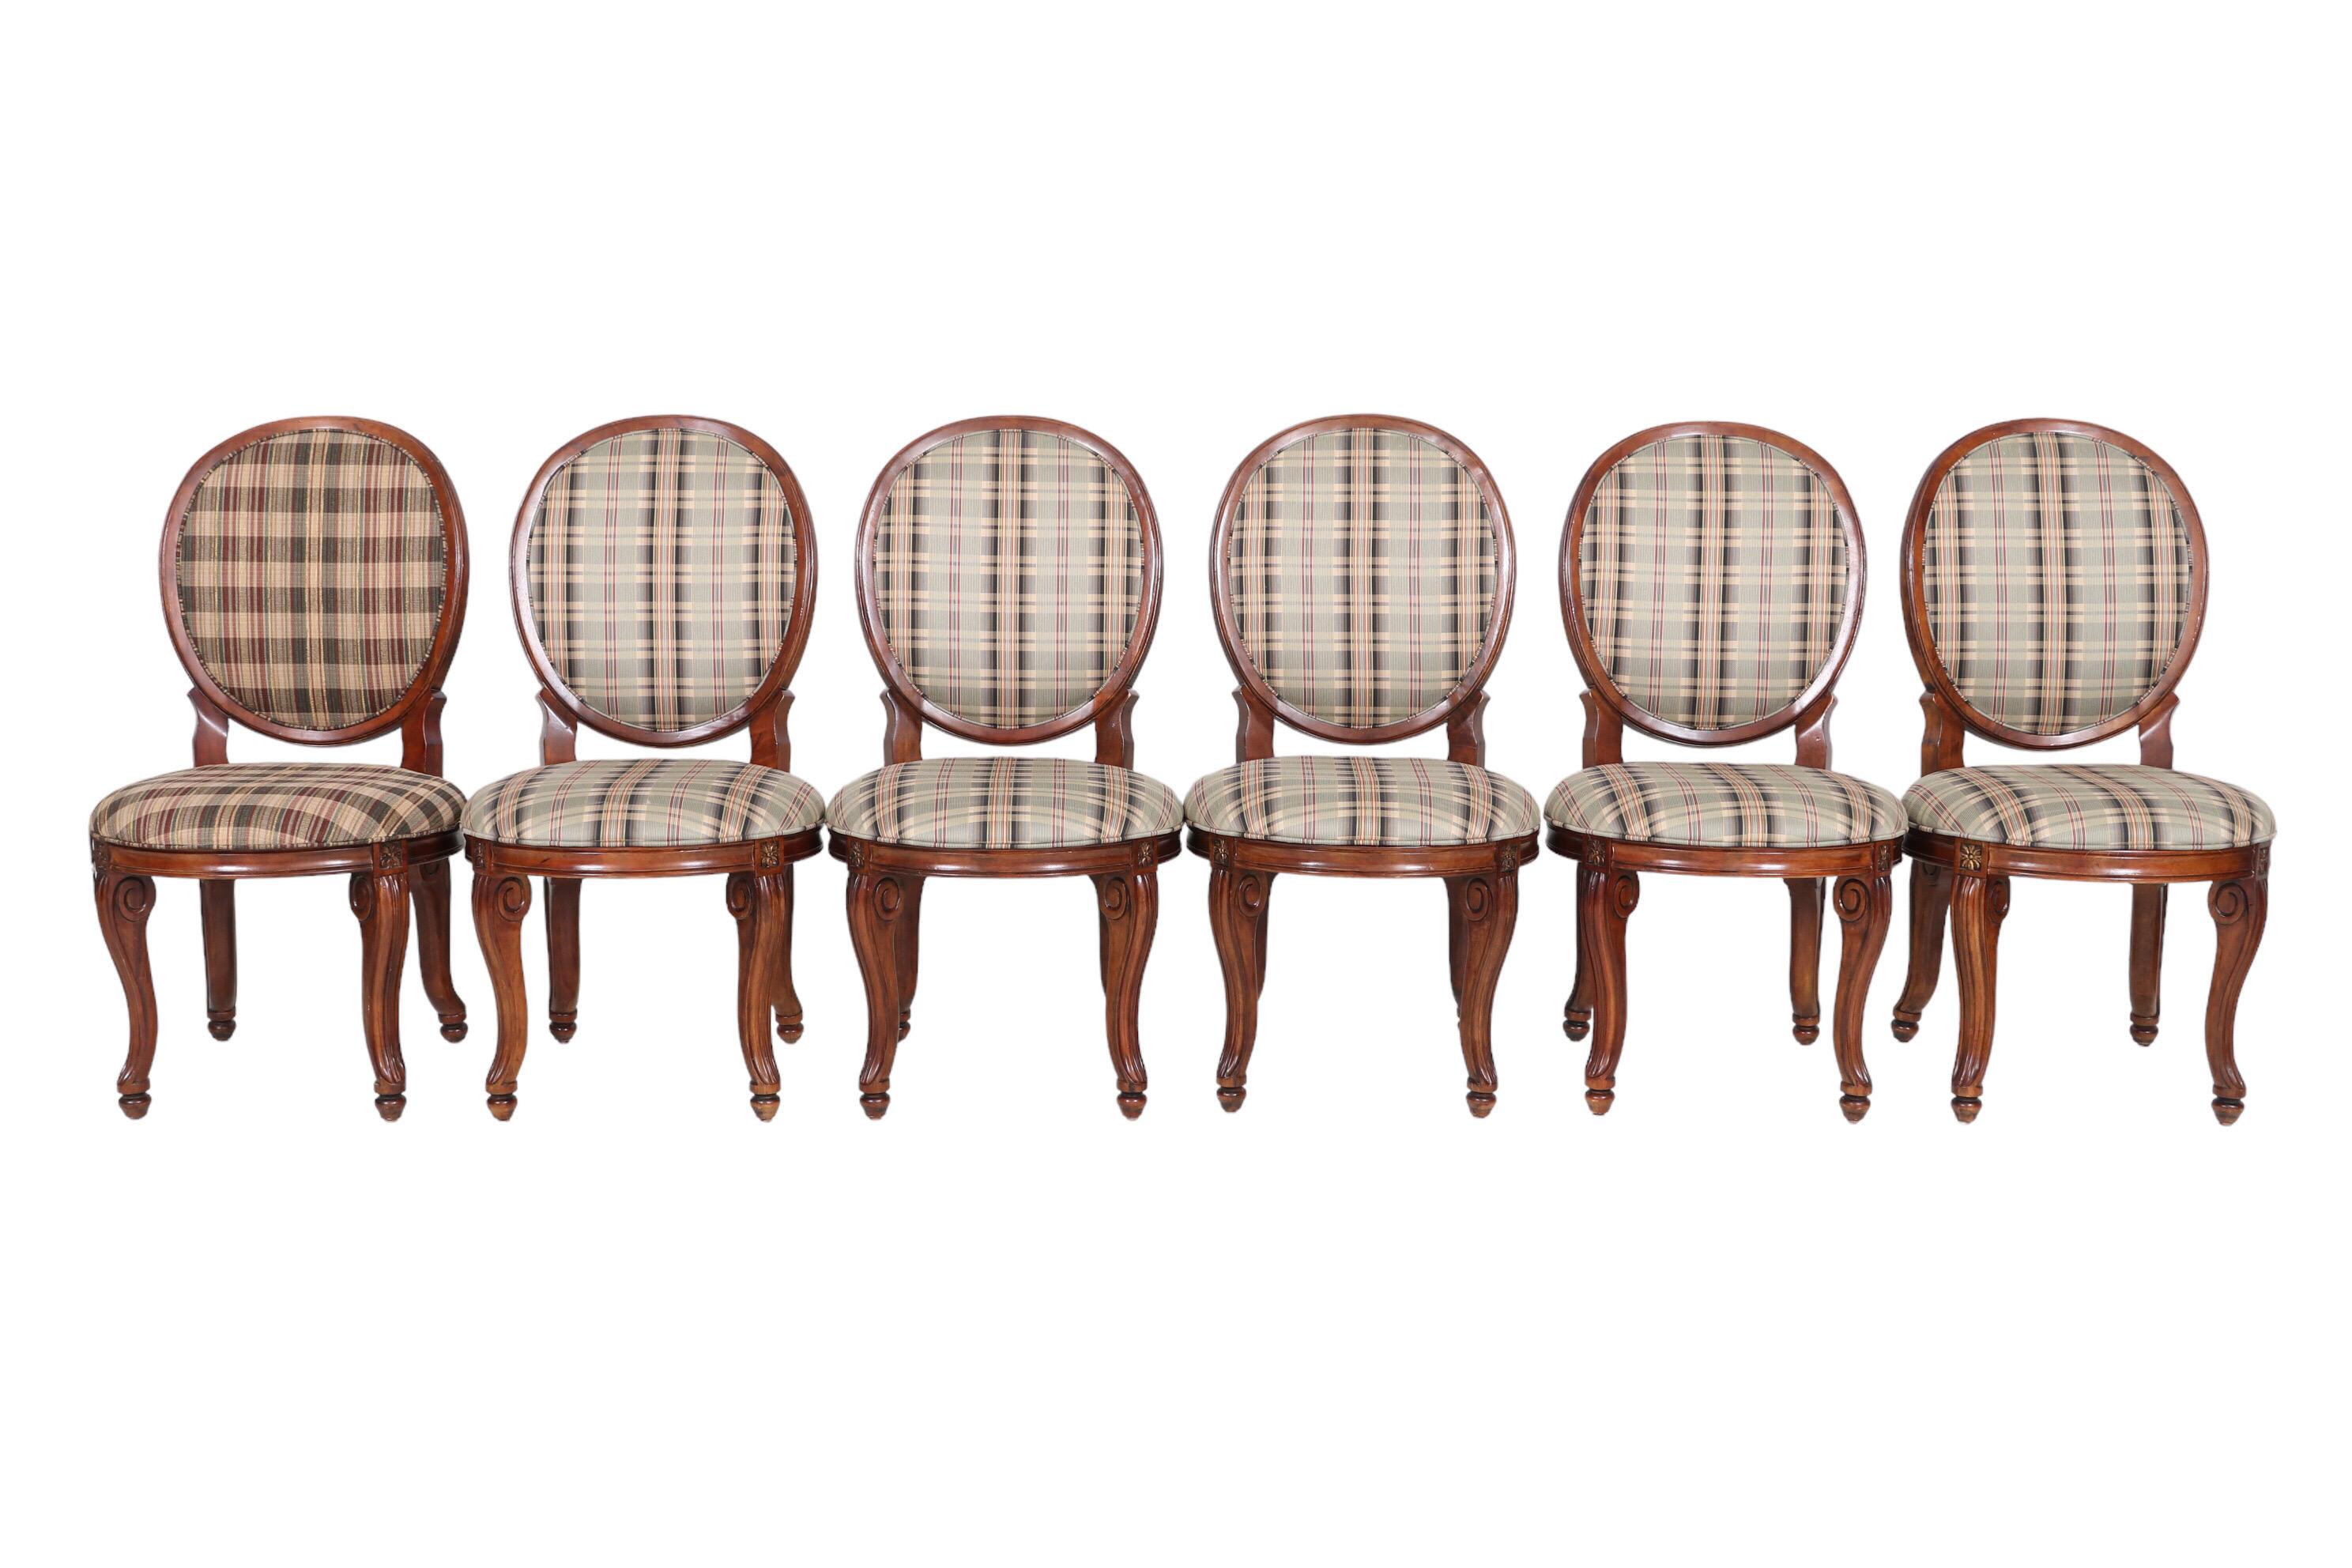 A set of six balloon back dining chairs made by Century Furniture of North Carolina. Round backs and seats are decorated with a simple beveled edge. Restrained cabriole legs are carved with a loose scroll at the top and finish in turnip feet.